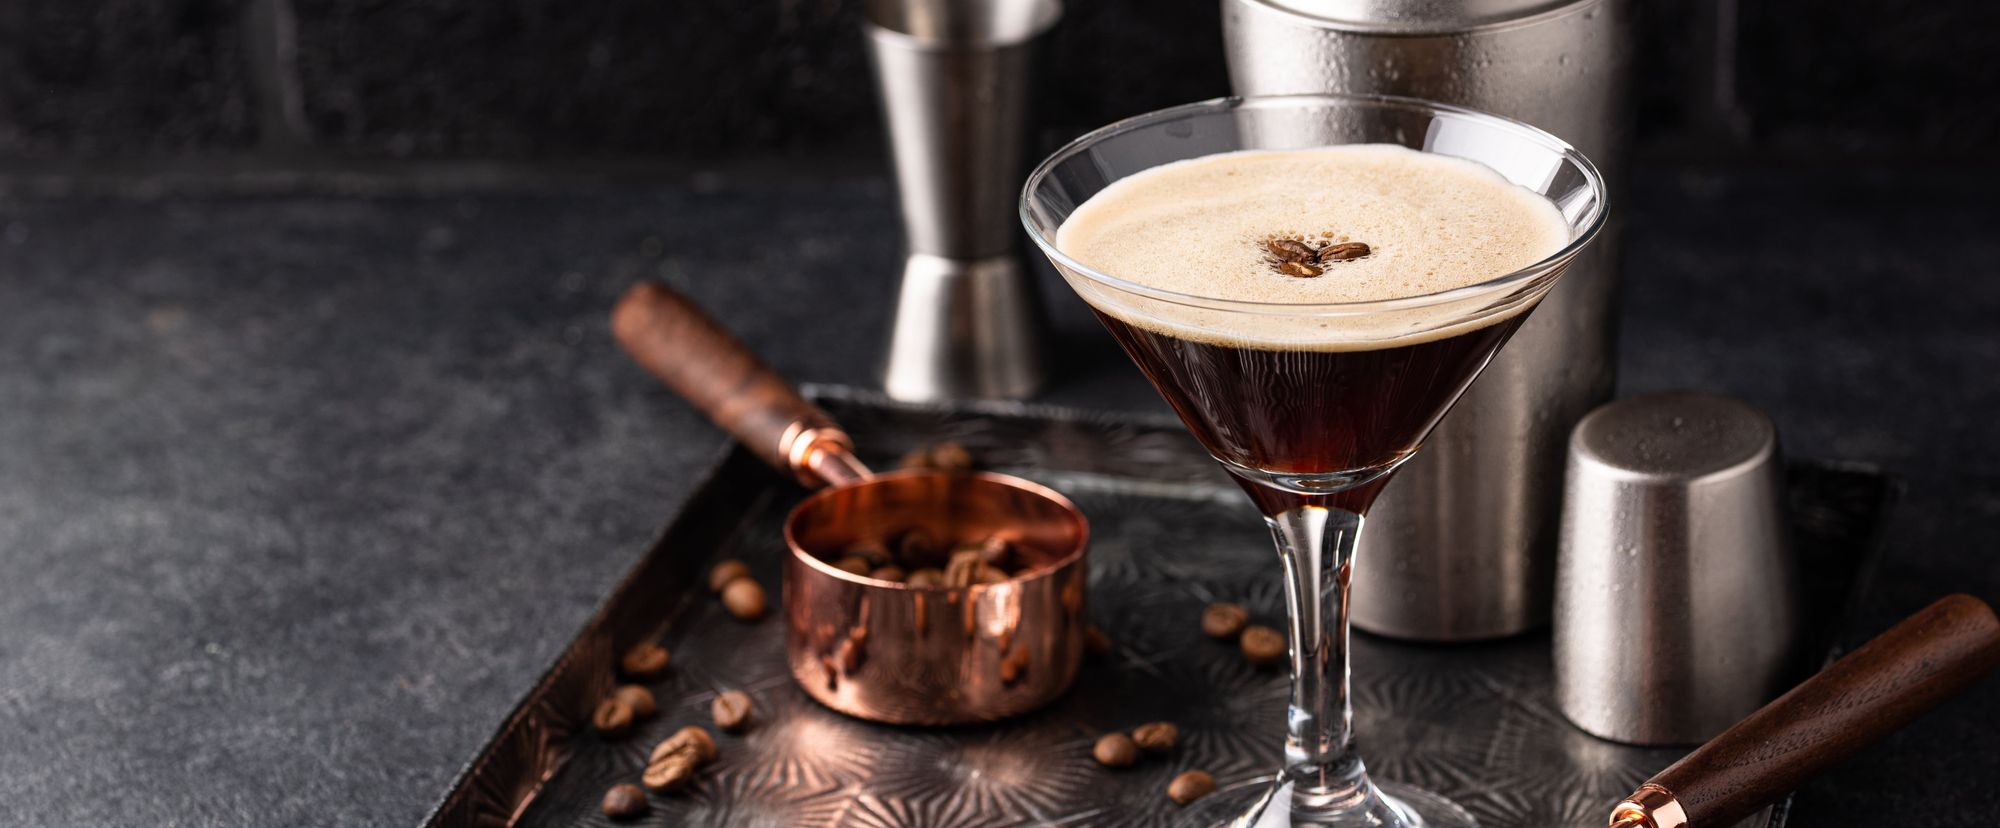 Espresso Martini cocktails with coffee beans and shaker